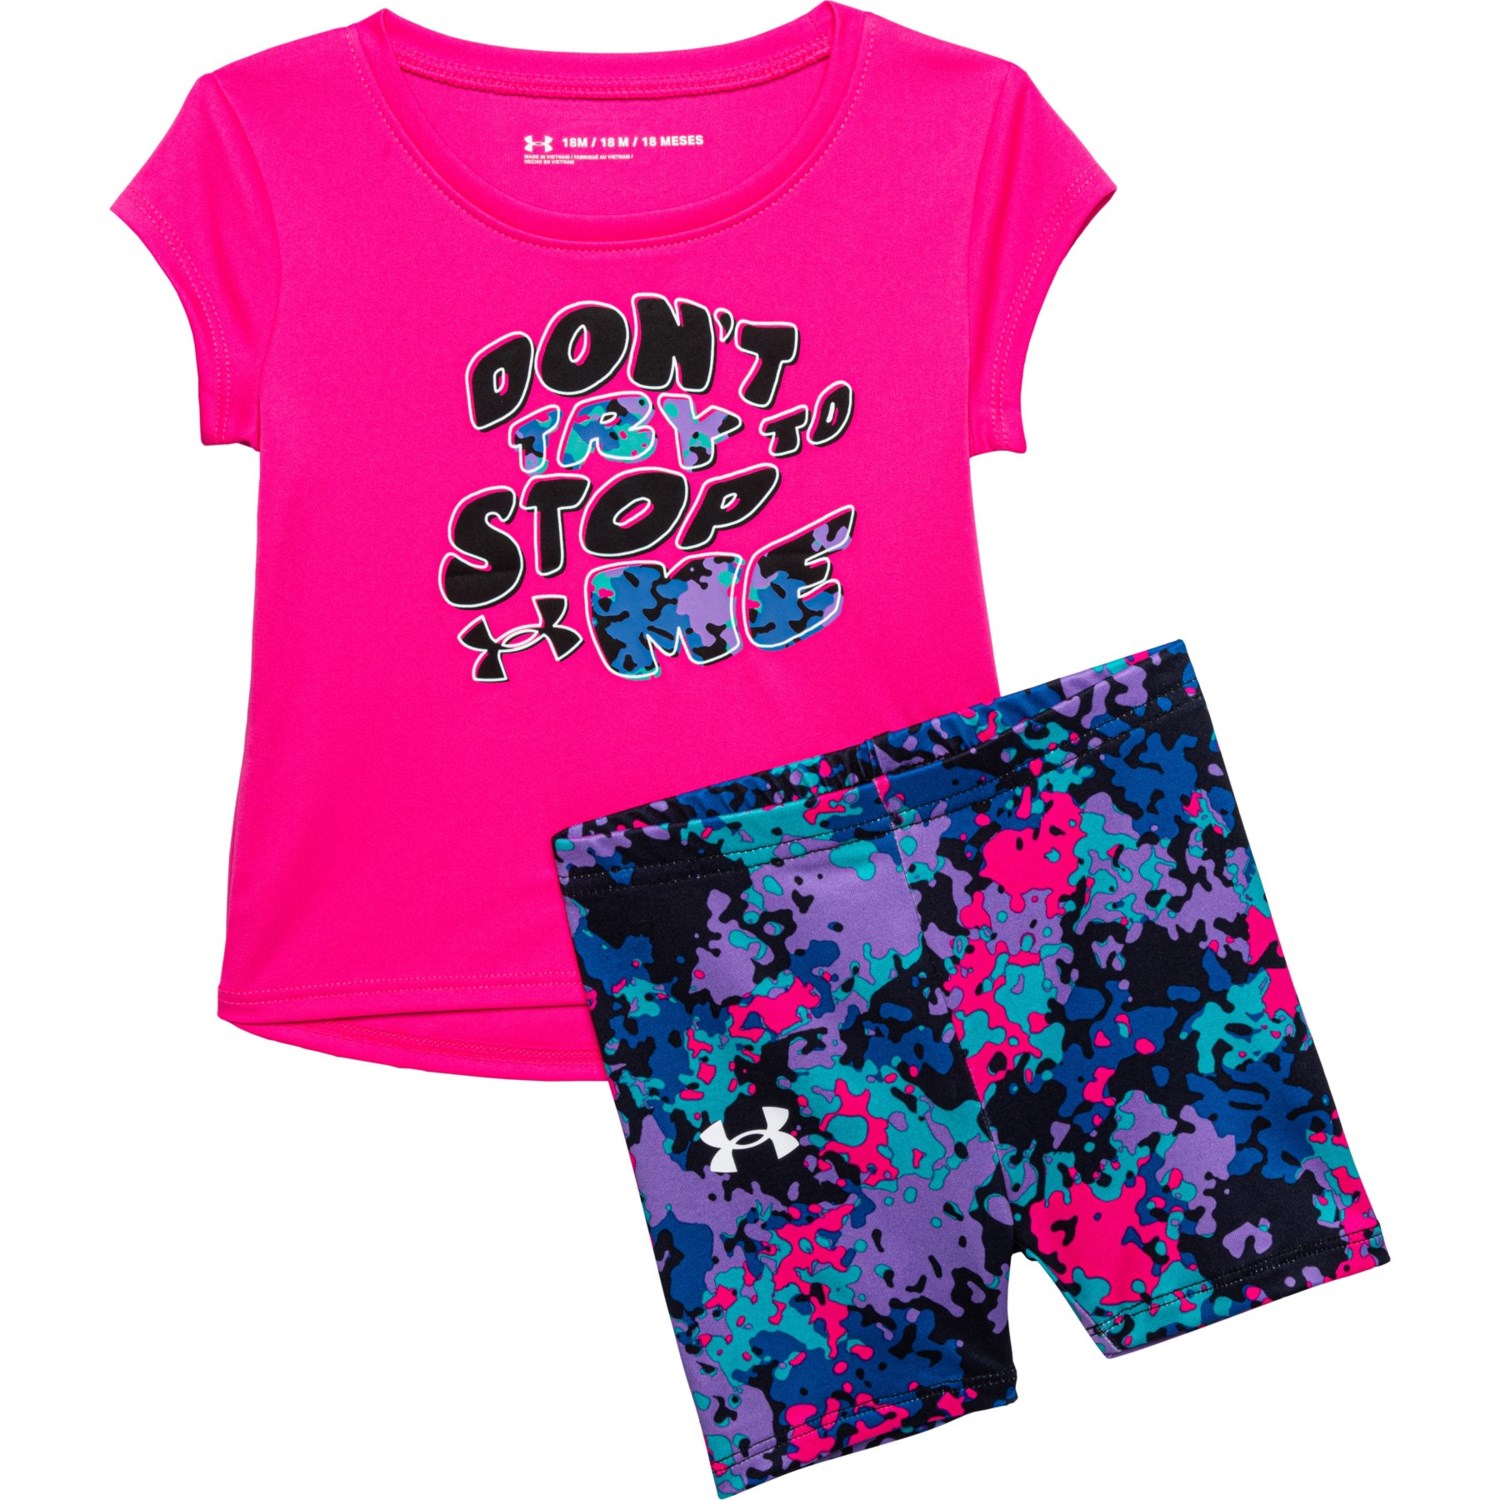 Under Armour Infant Girls Don’t Try To Stop Me Shirt and Shorts Set- Short Sleeve